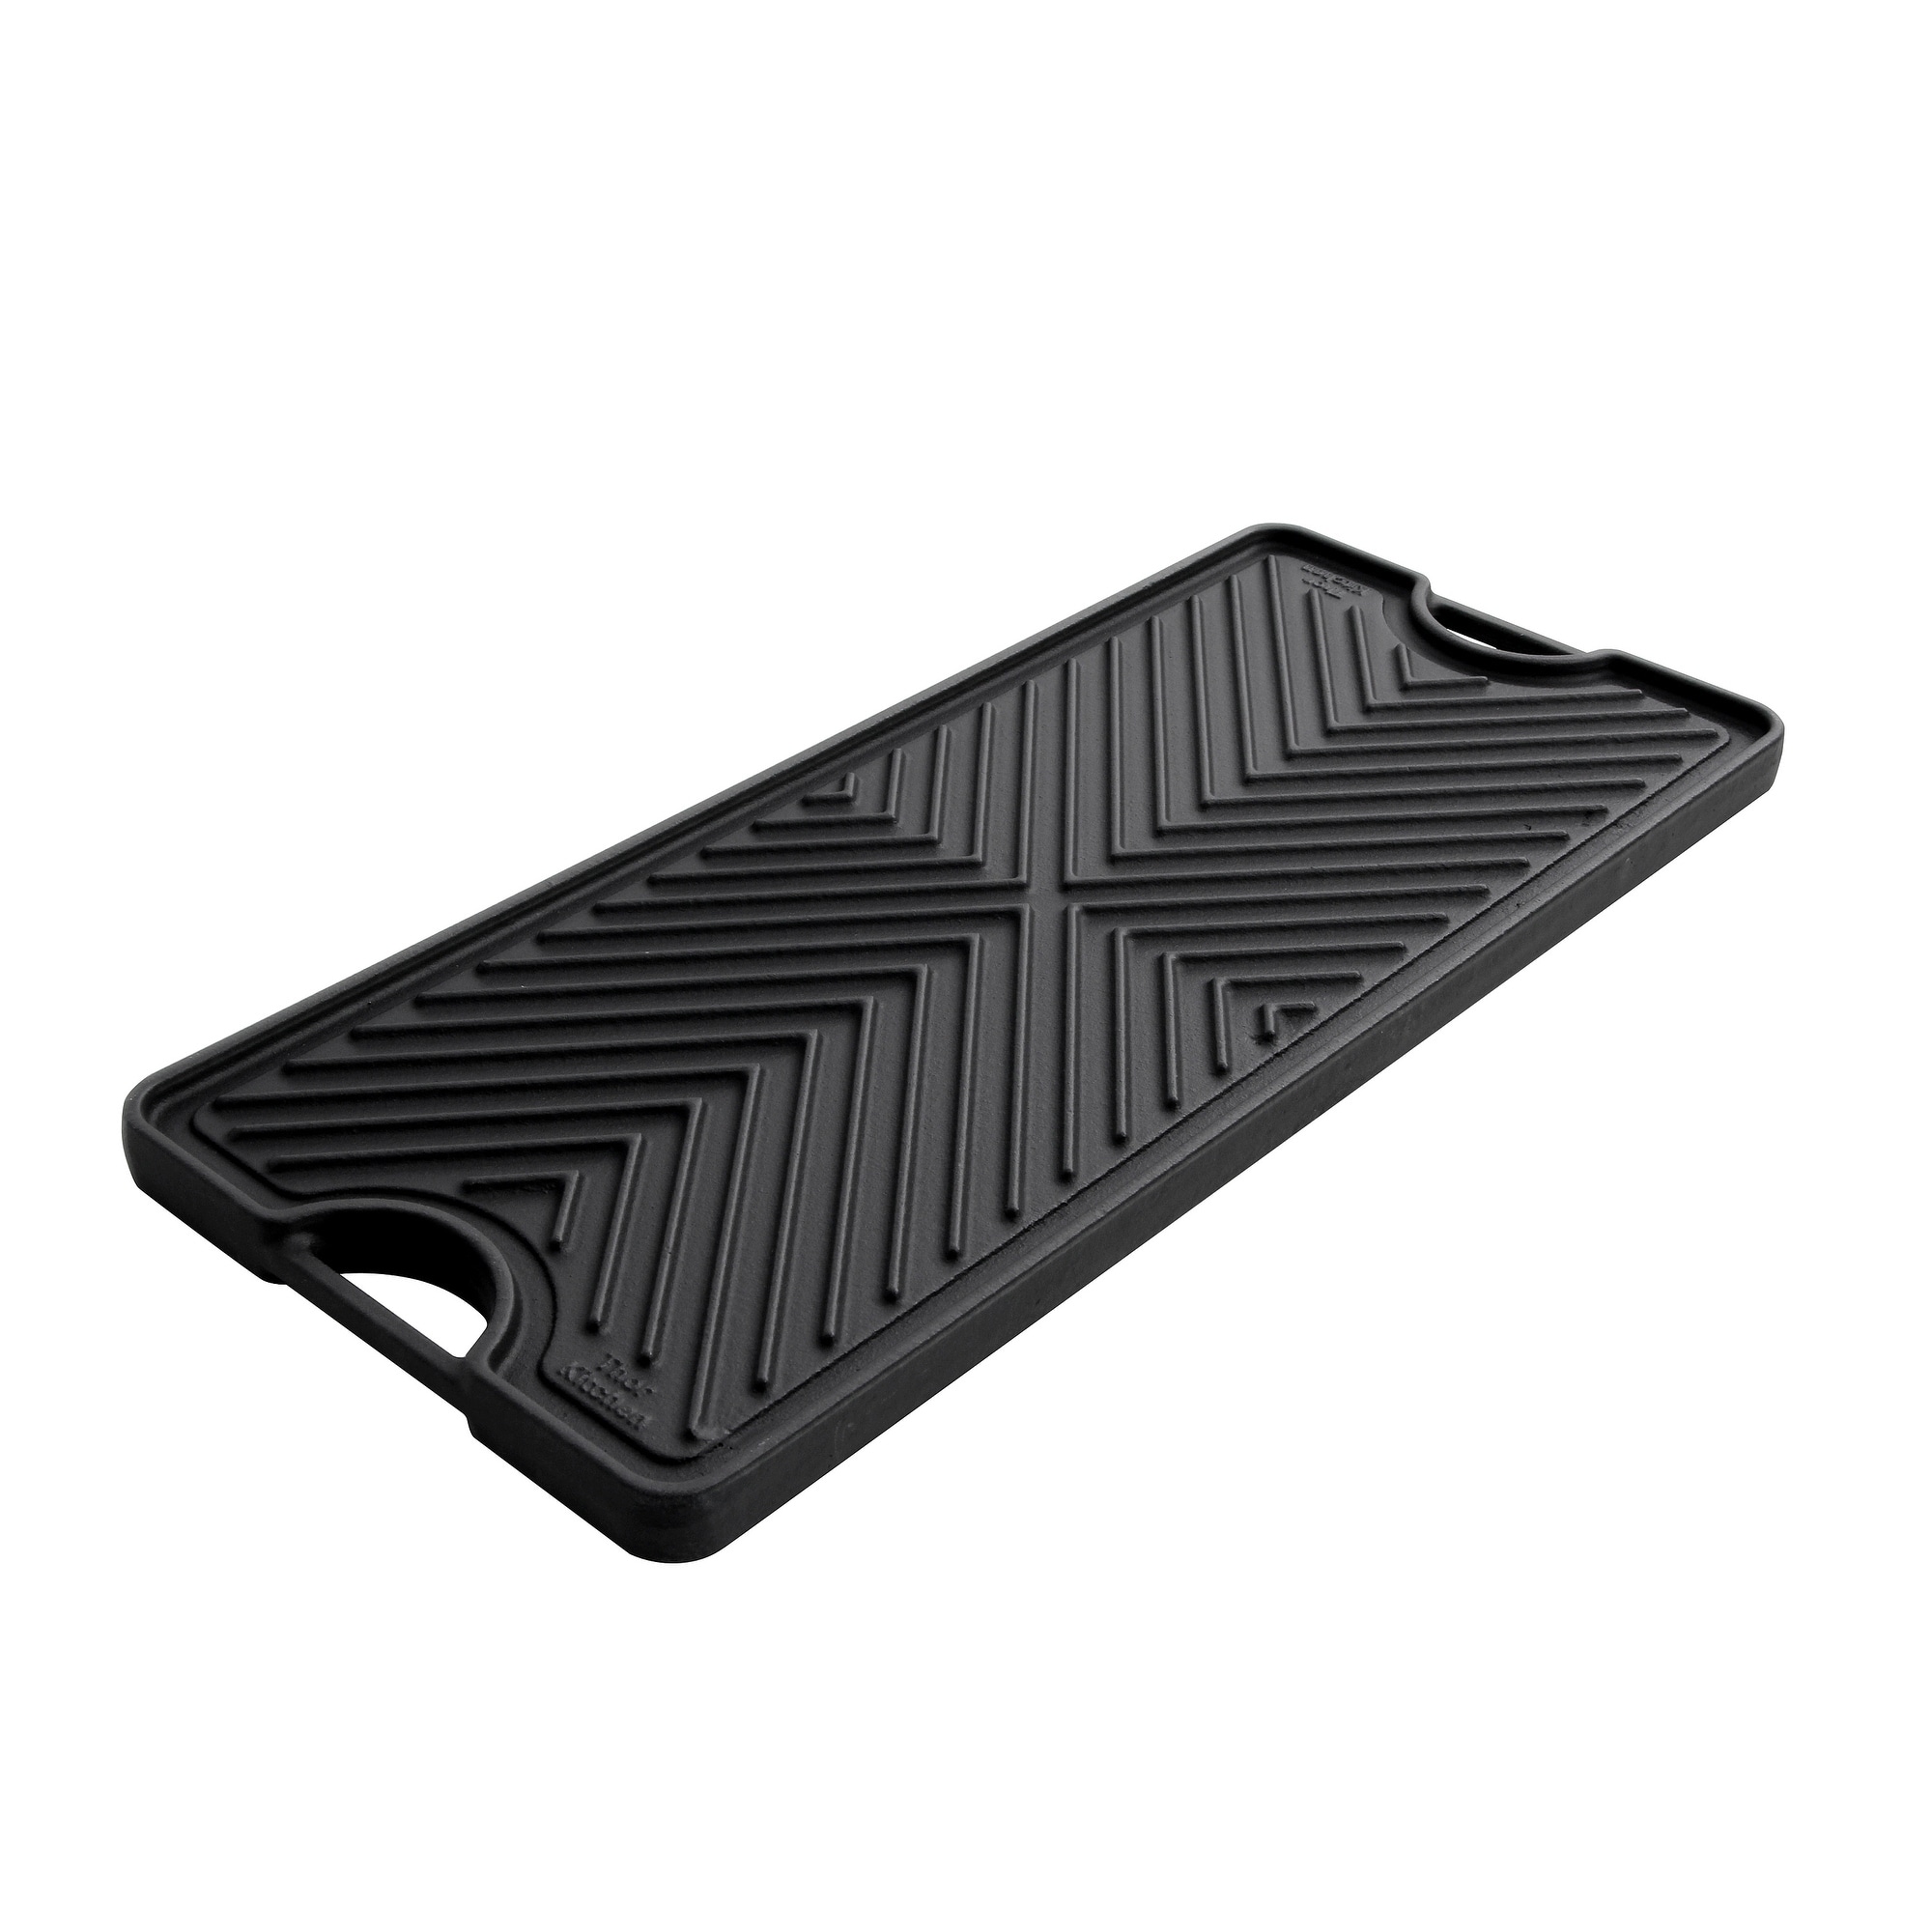 Thor Kitchen RG1022 Cast Iron Reversible Griddle/Grill